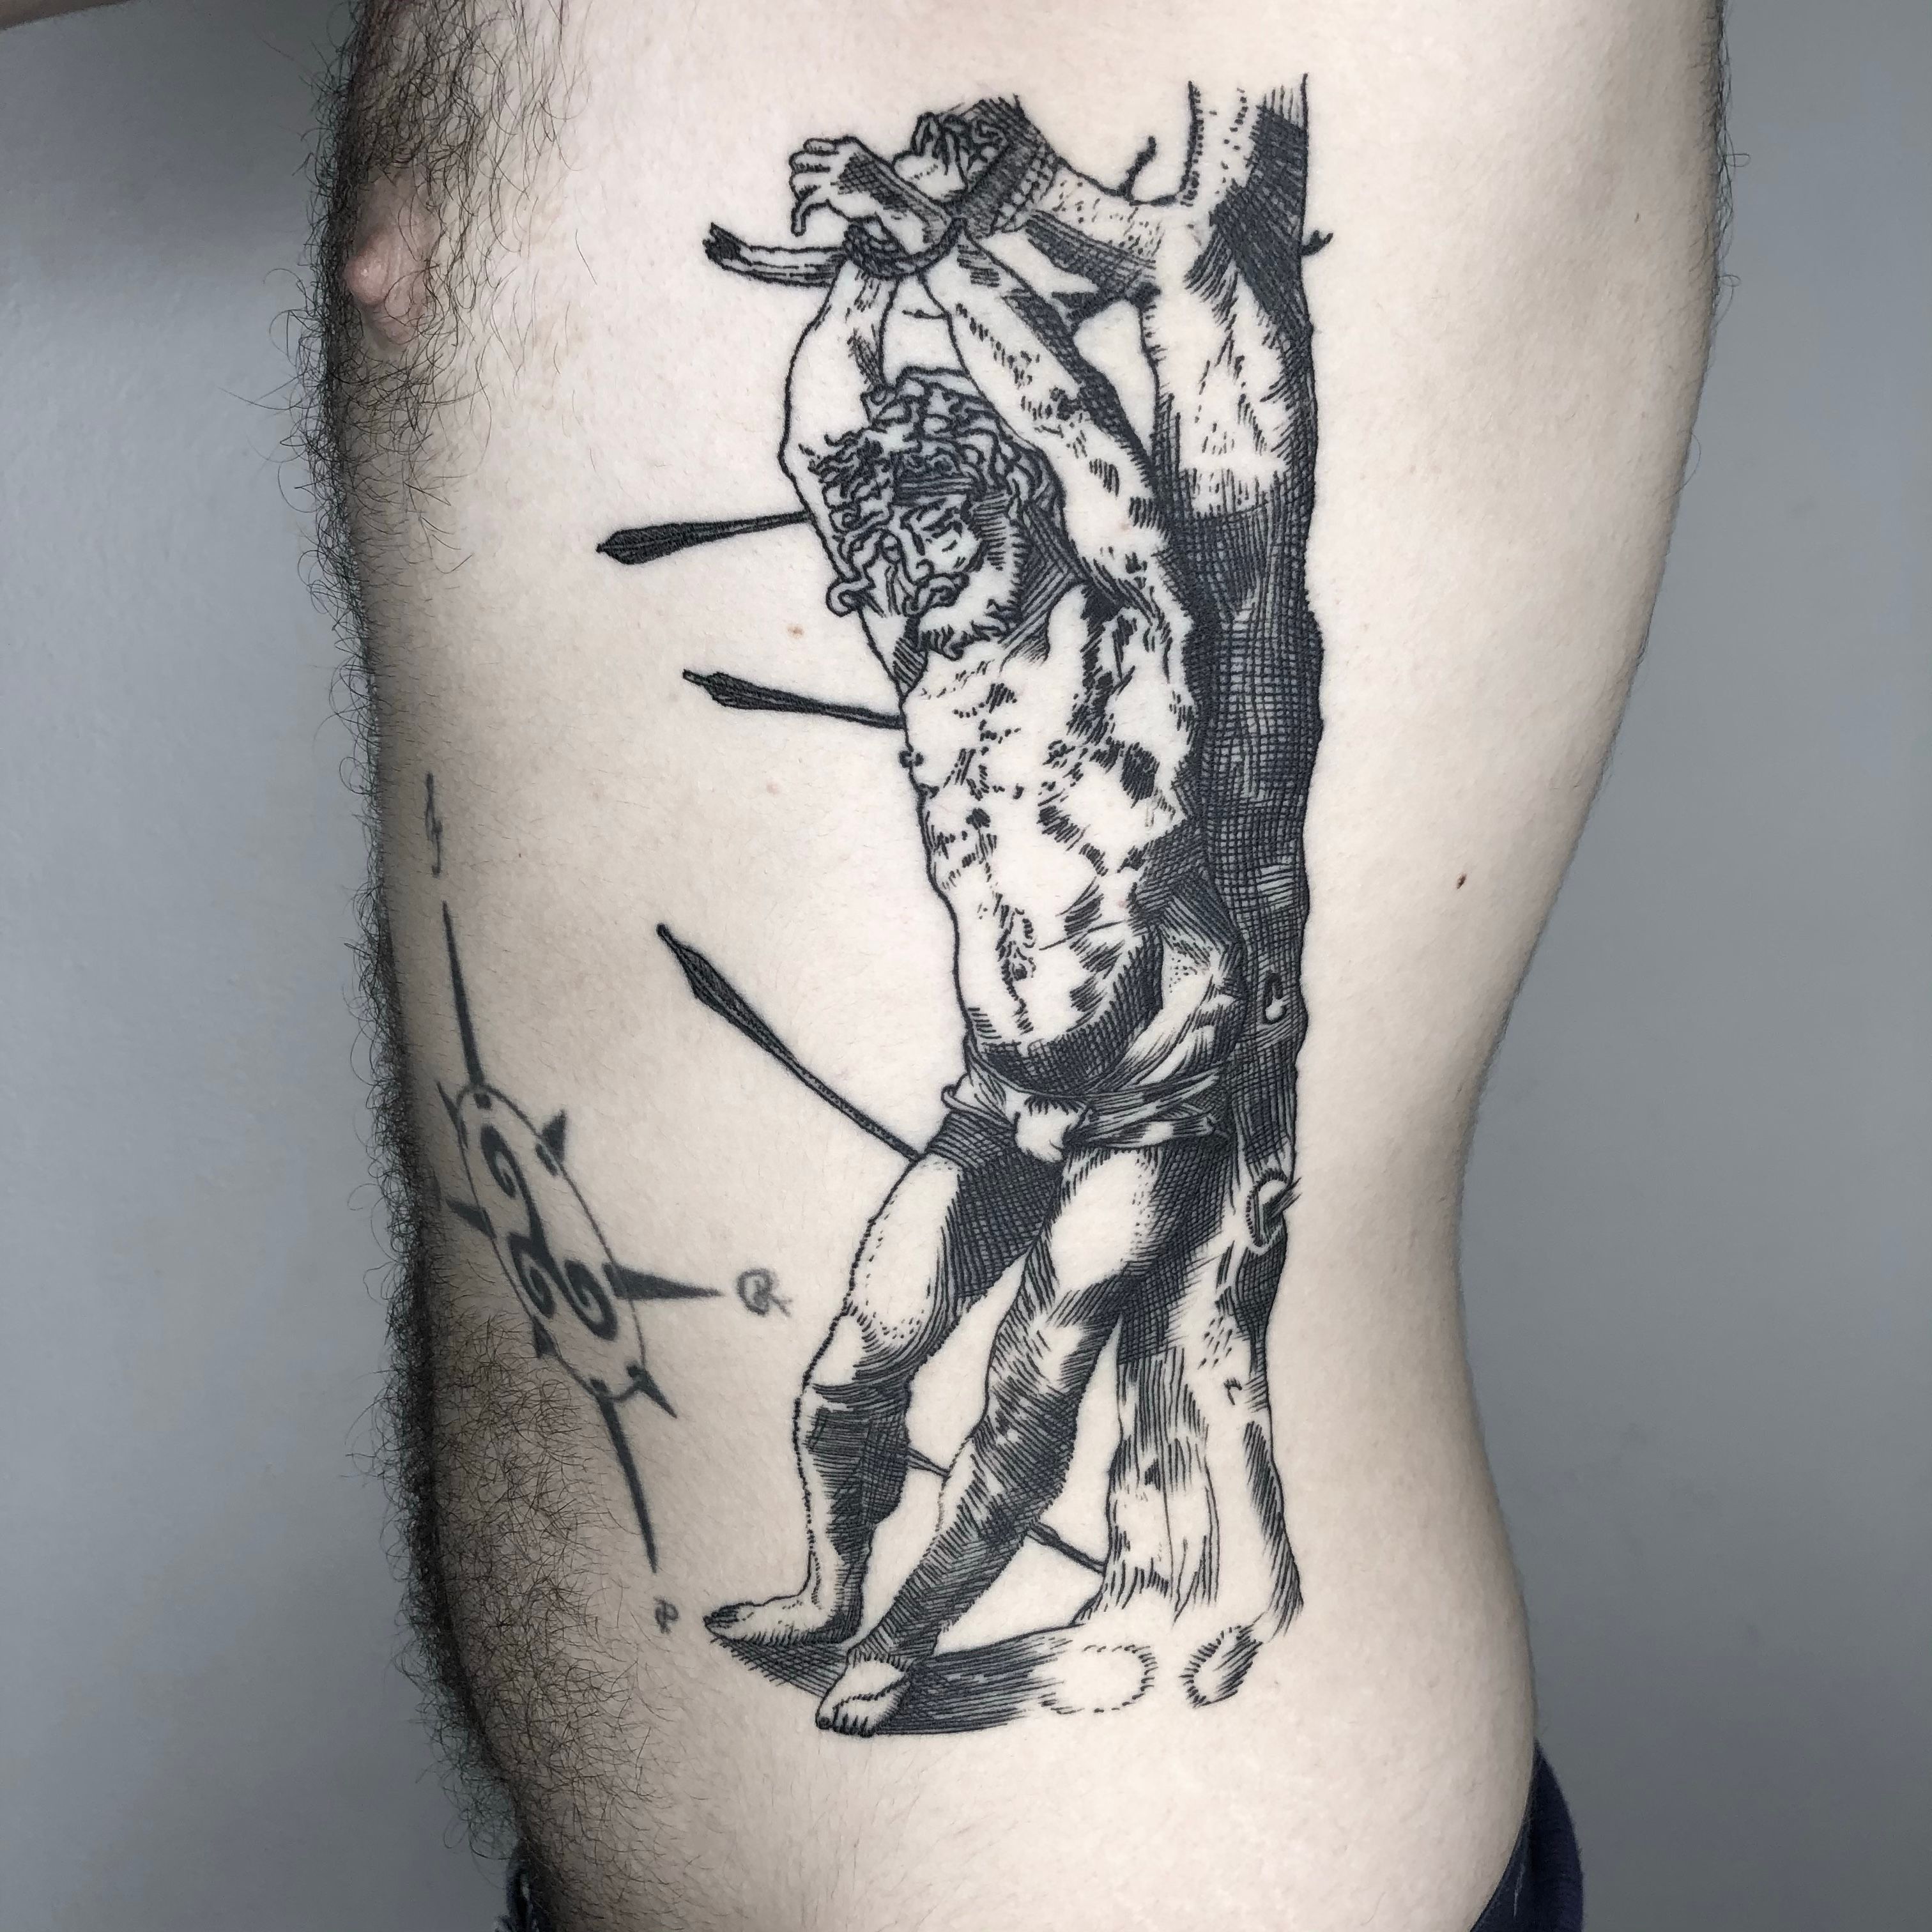 Dortwork style calf piece inspired on The Martyrdom of